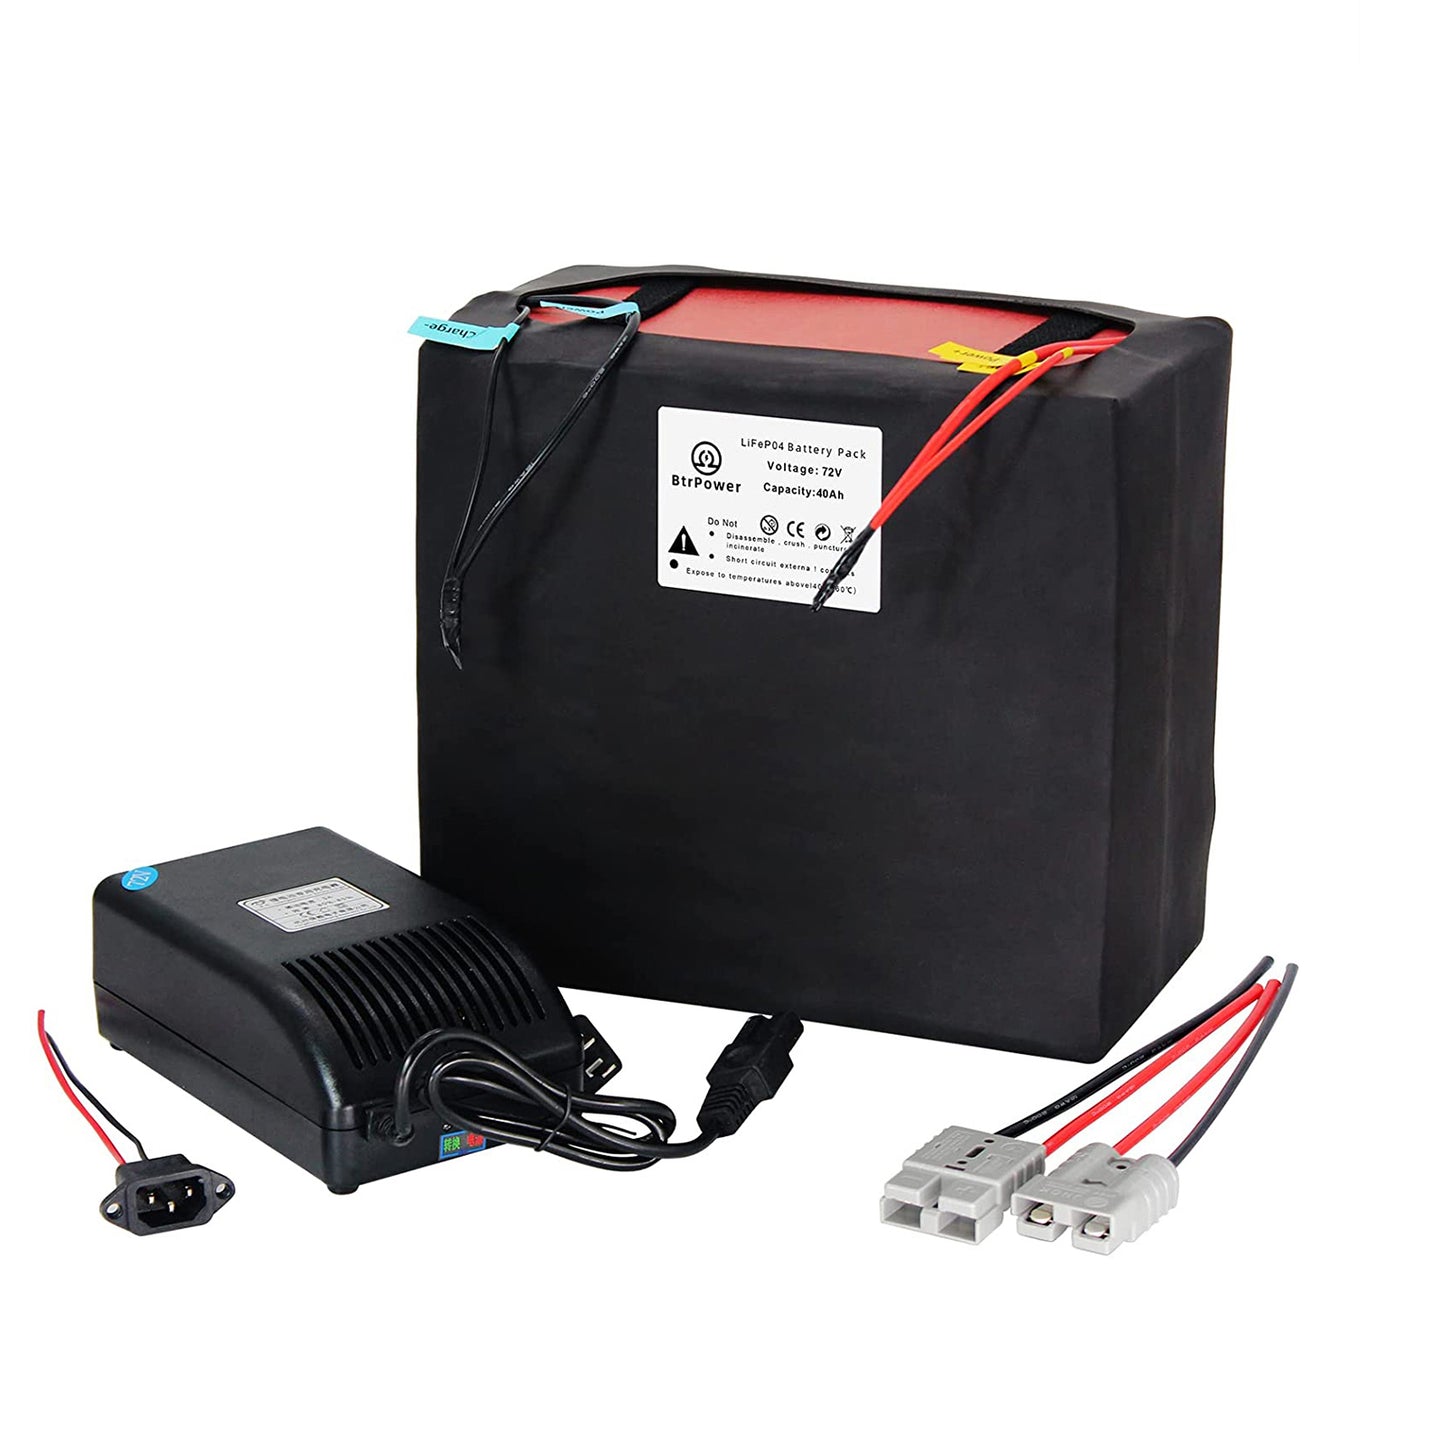 BtrPower 72V Ebike Battery 40Ah Lithium Lifepo4 for 1000W-3000W Electric Scooter Bike 80A BMS